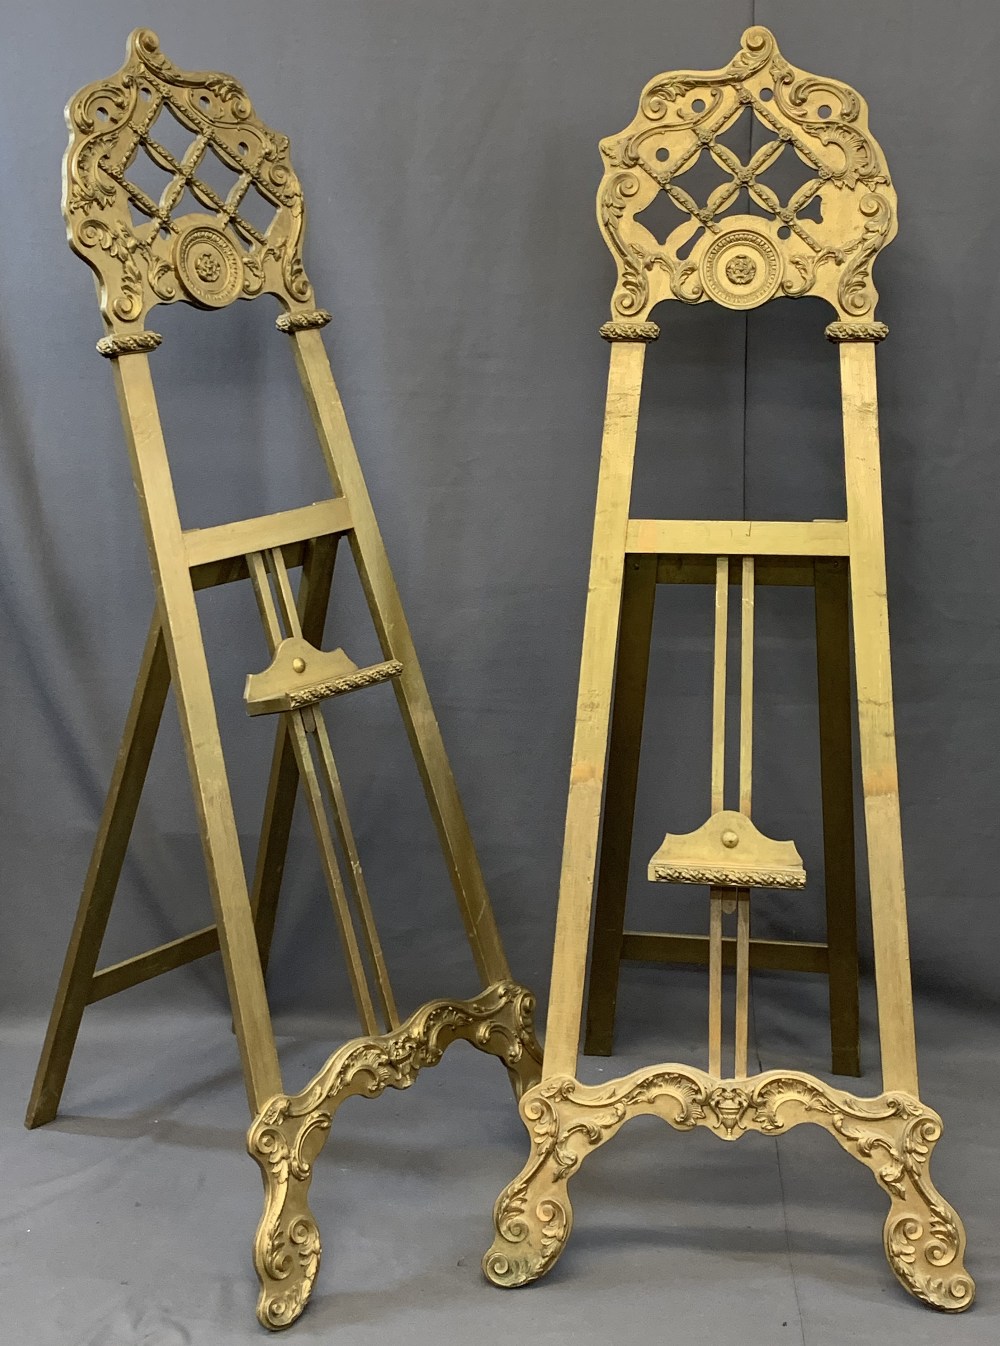 TWO LARGE VINTAGE GILT DECORATED EASEL STANDS having lattice work and applied mouldings with